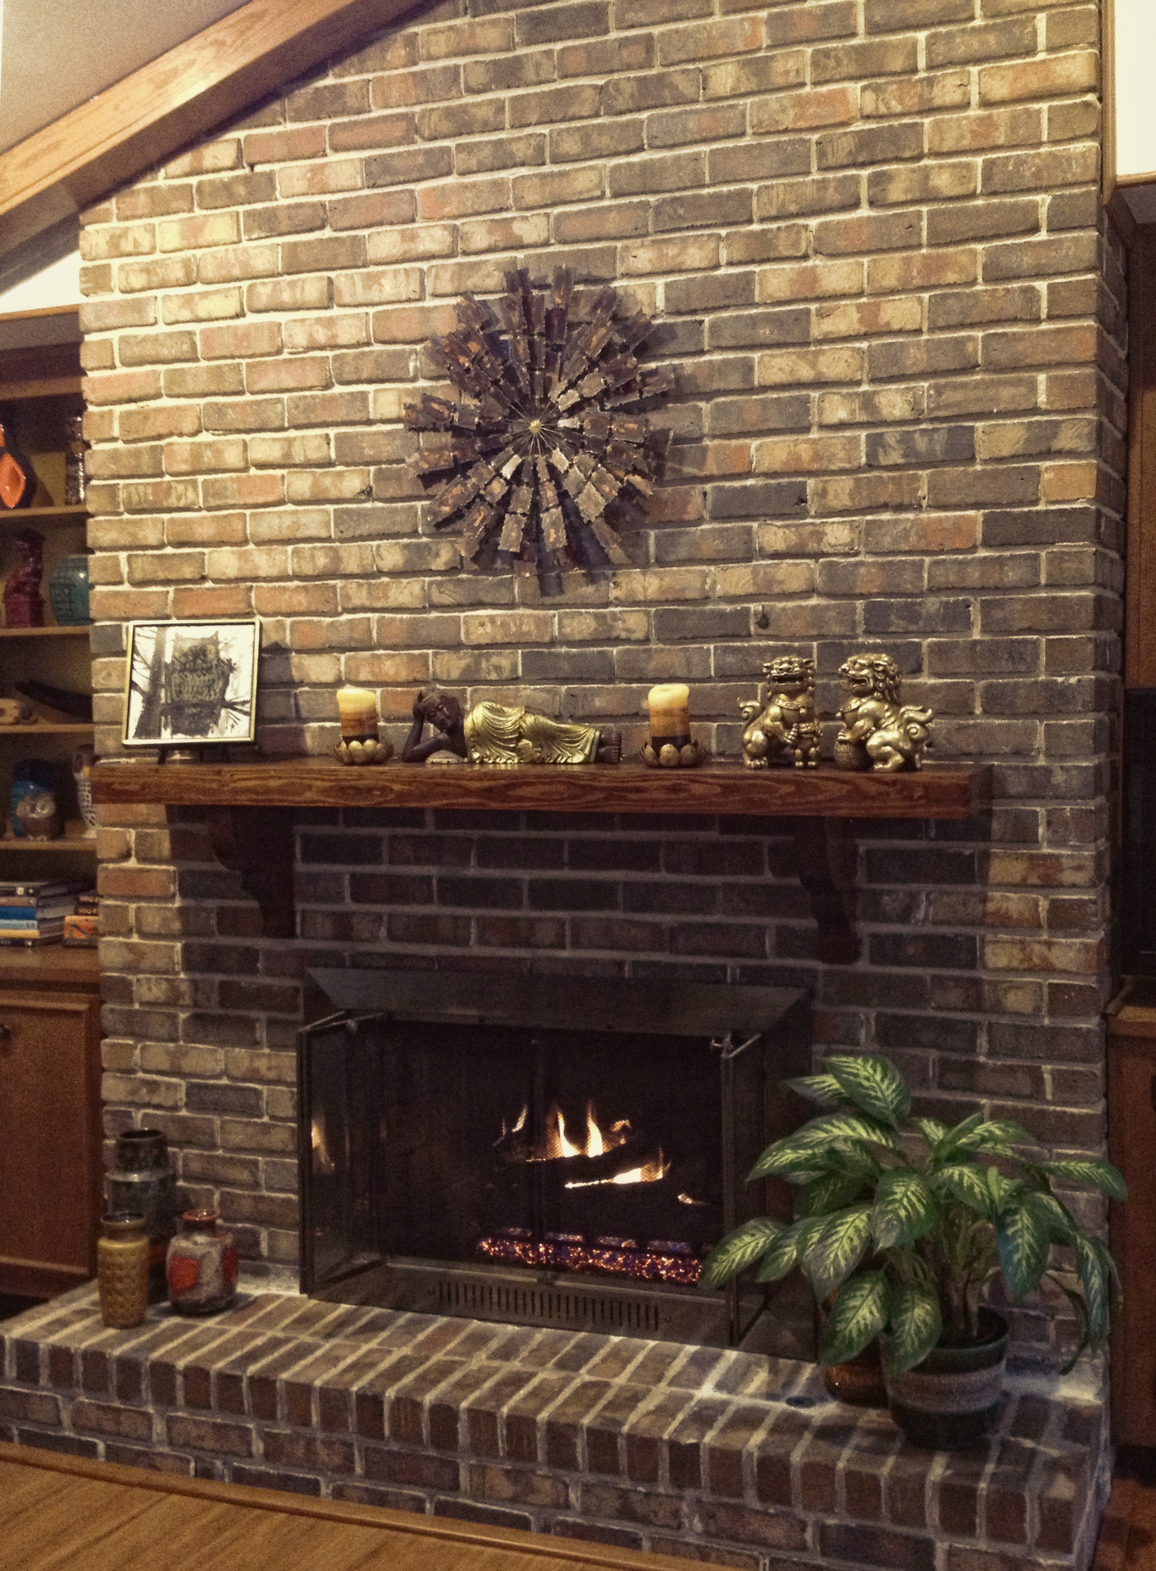 Decorating a fireplace - 180+ photos from readers' homes - Retro Renovation